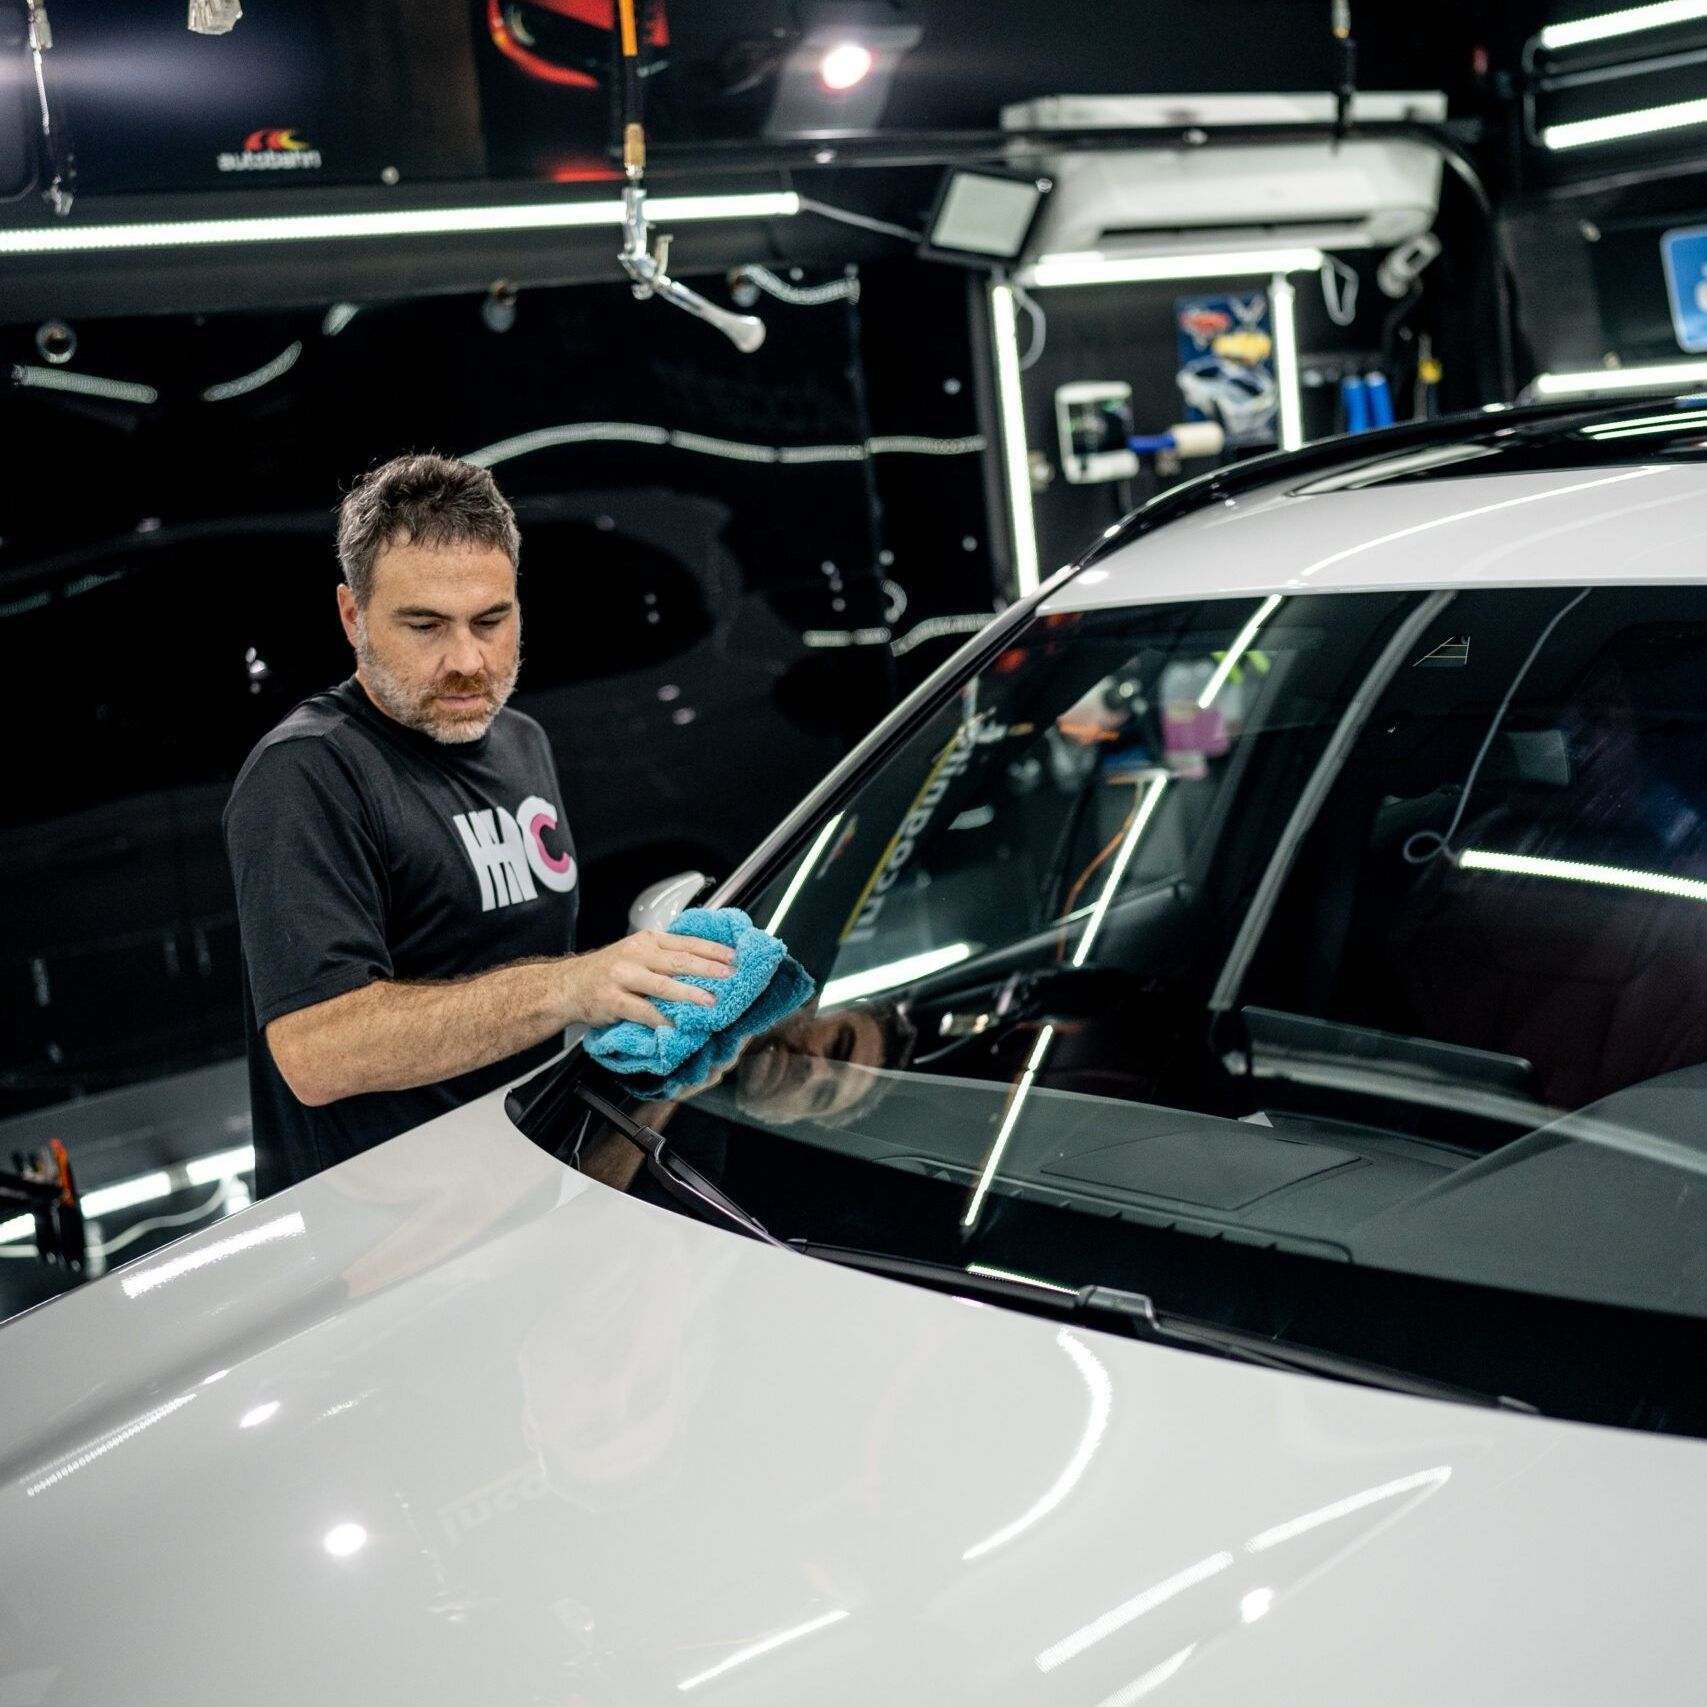 A man is cleaning the windshield of a white car in a garage.